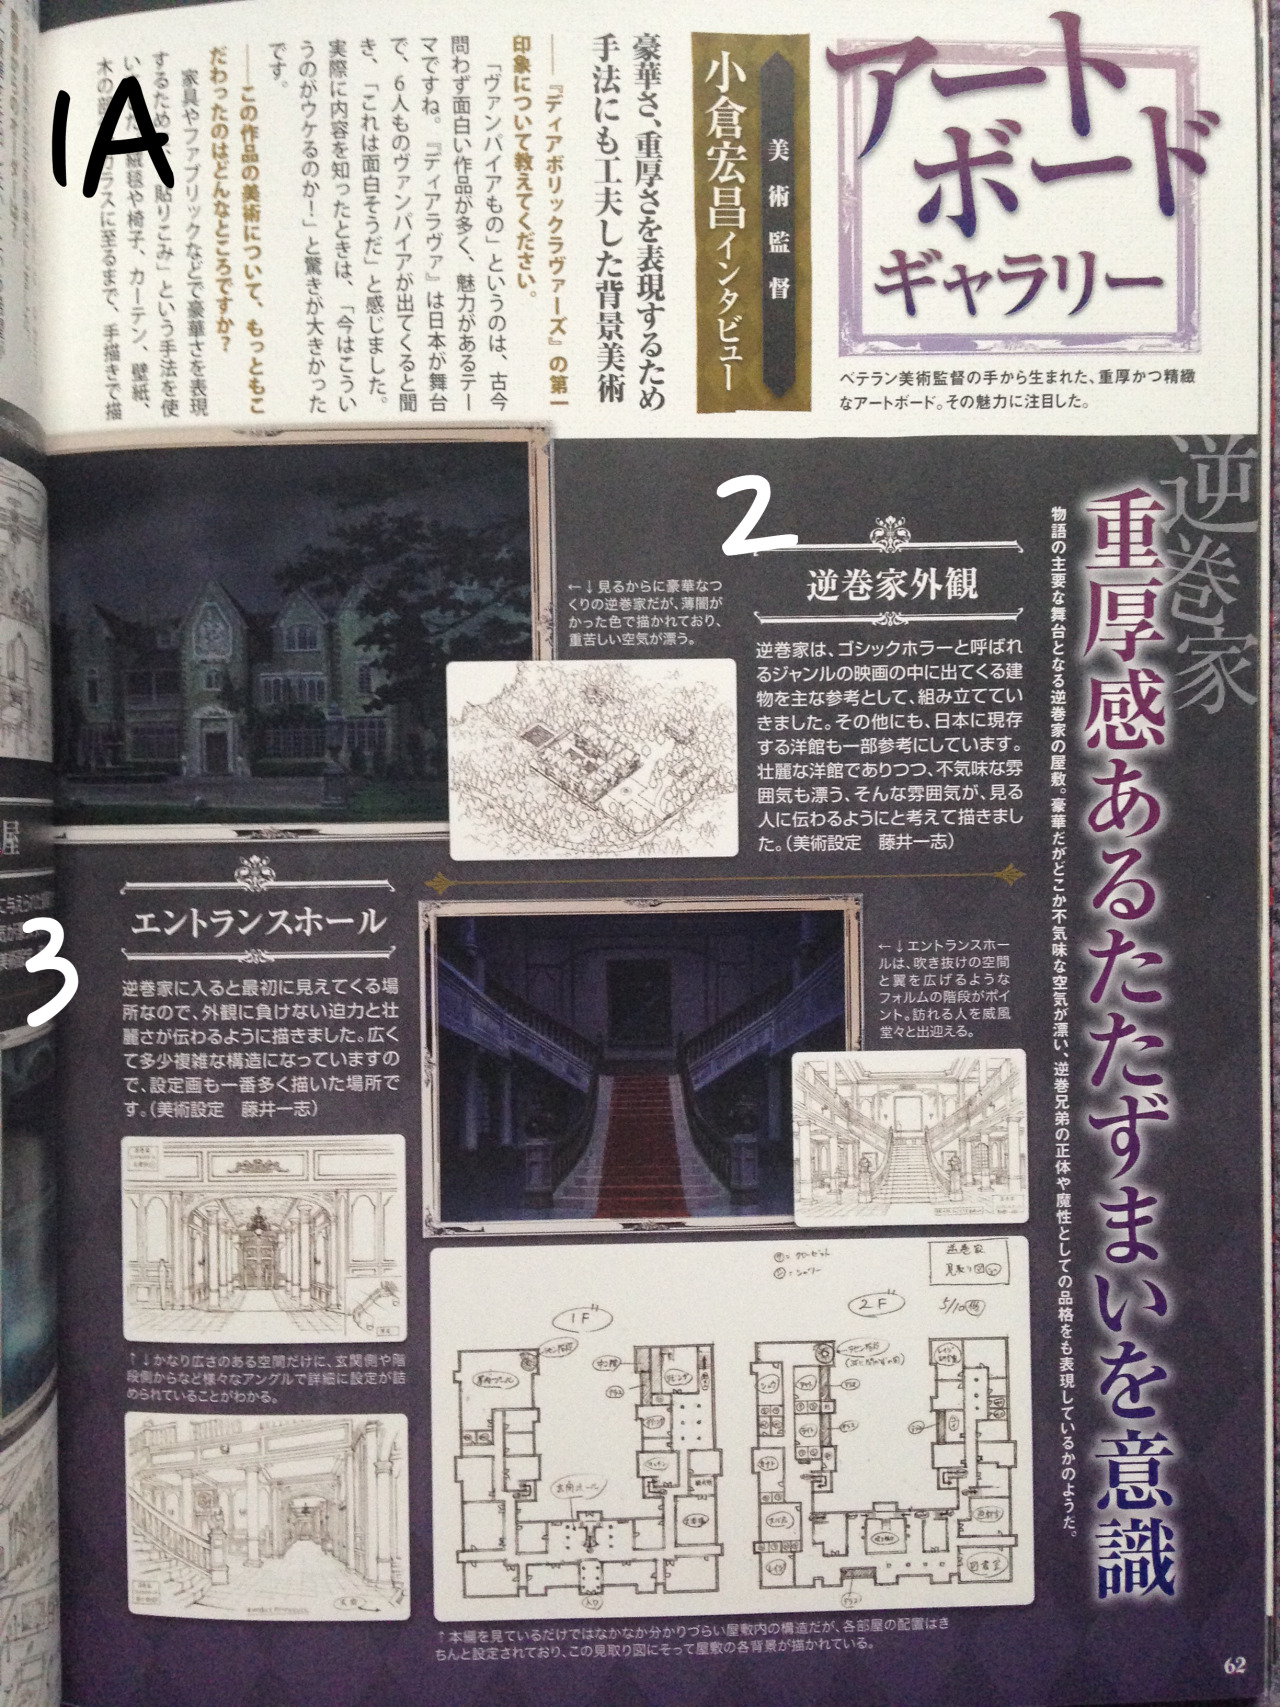 Details about   JAPAN Anime Diabolik Lovers Official Fan Book From Japan 